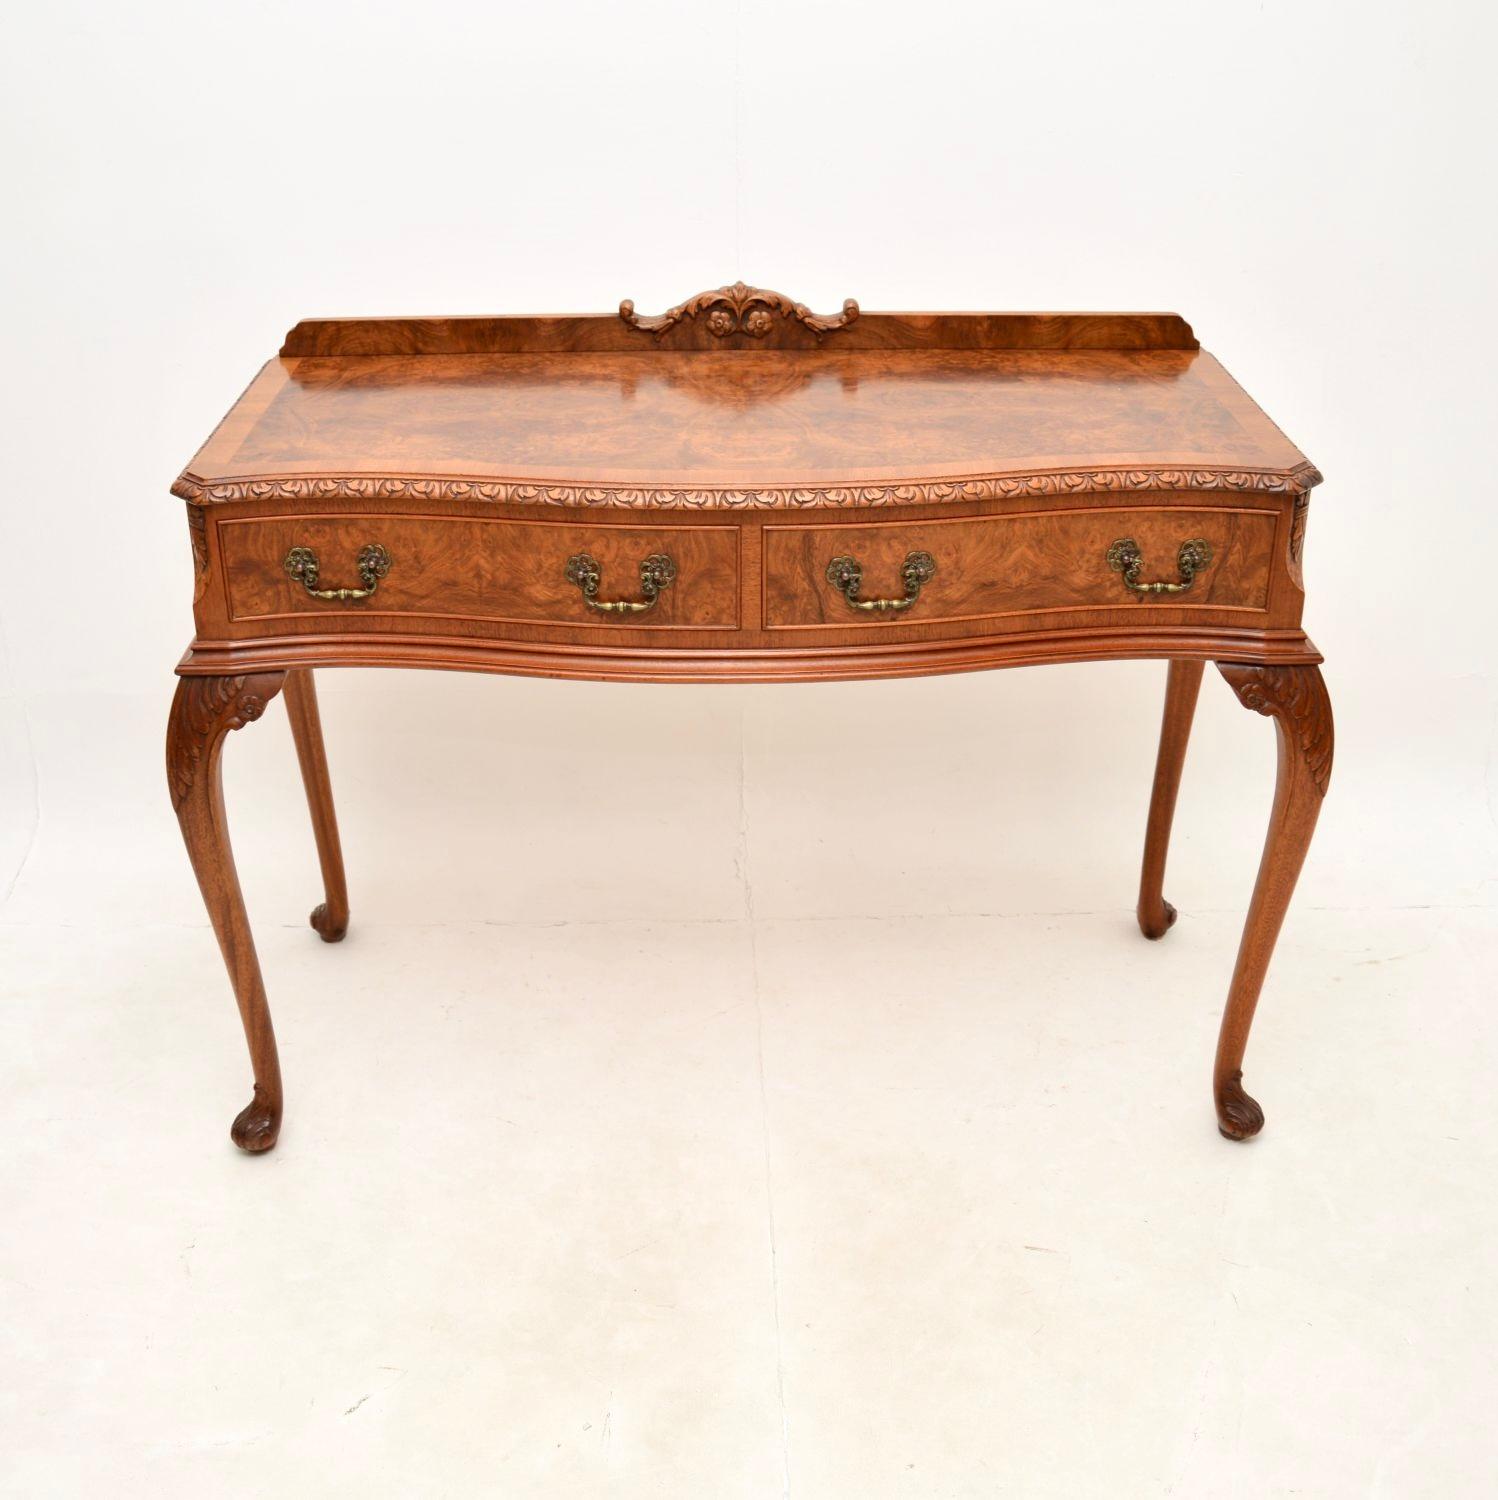 An absolutely stunning antique burr walnut console / side table. This was made in England, it dates from the 1920-30’s.

It is of superb quality and is a great size. The burr walnut grain patterns and colour tones are gorgeous, this has beautiful